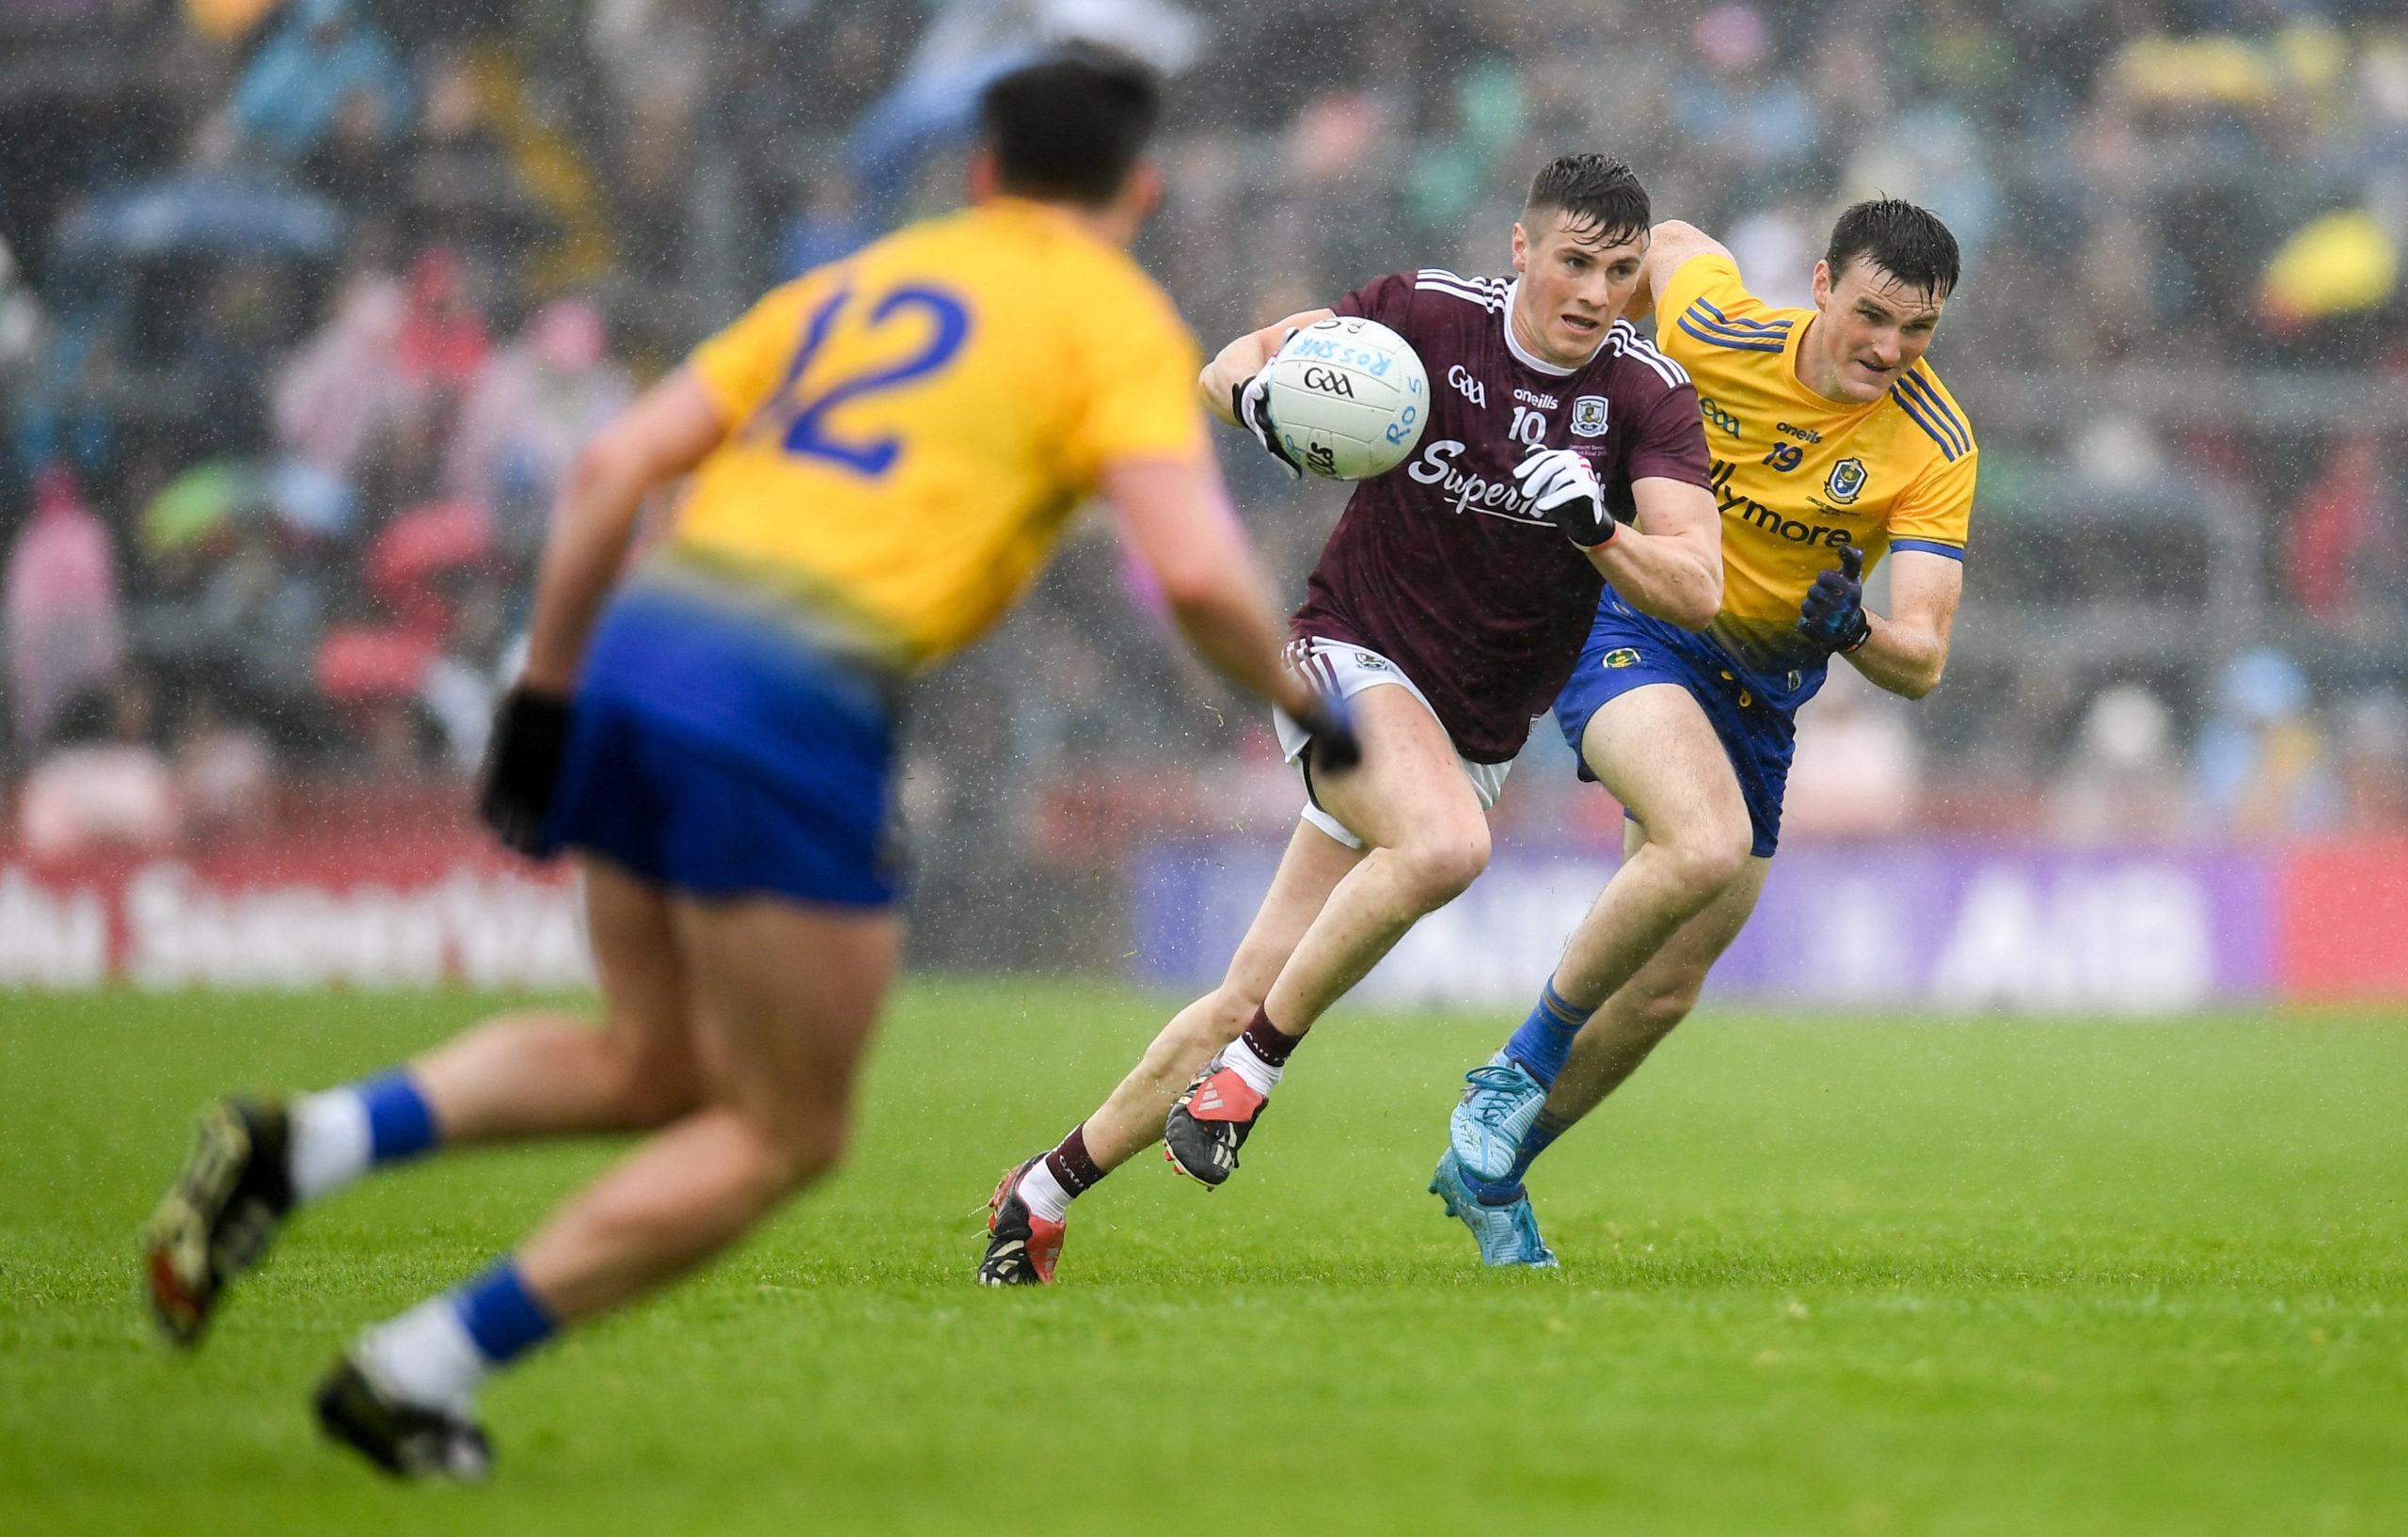 Dates, Times and Venues for Connacht SFC Confirmed